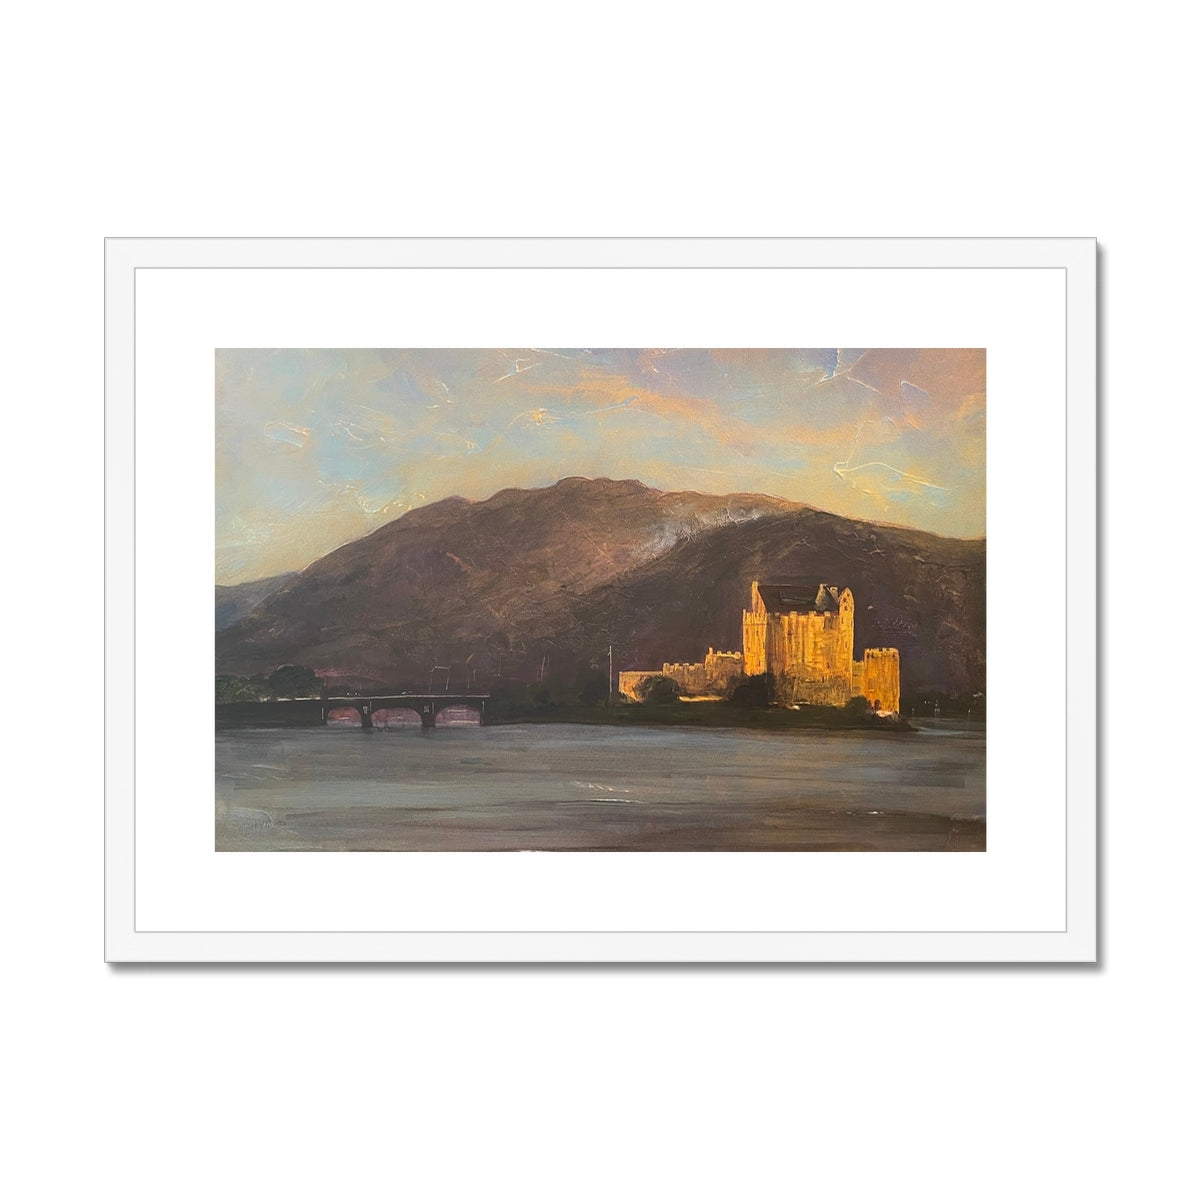 Eilean Donan Castle Painting | Framed & Mounted Prints From Scotland-Framed & Mounted Prints-Historic & Iconic Scotland Art Gallery-A2 Landscape-White Frame-Paintings, Prints, Homeware, Art Gifts From Scotland By Scottish Artist Kevin Hunter